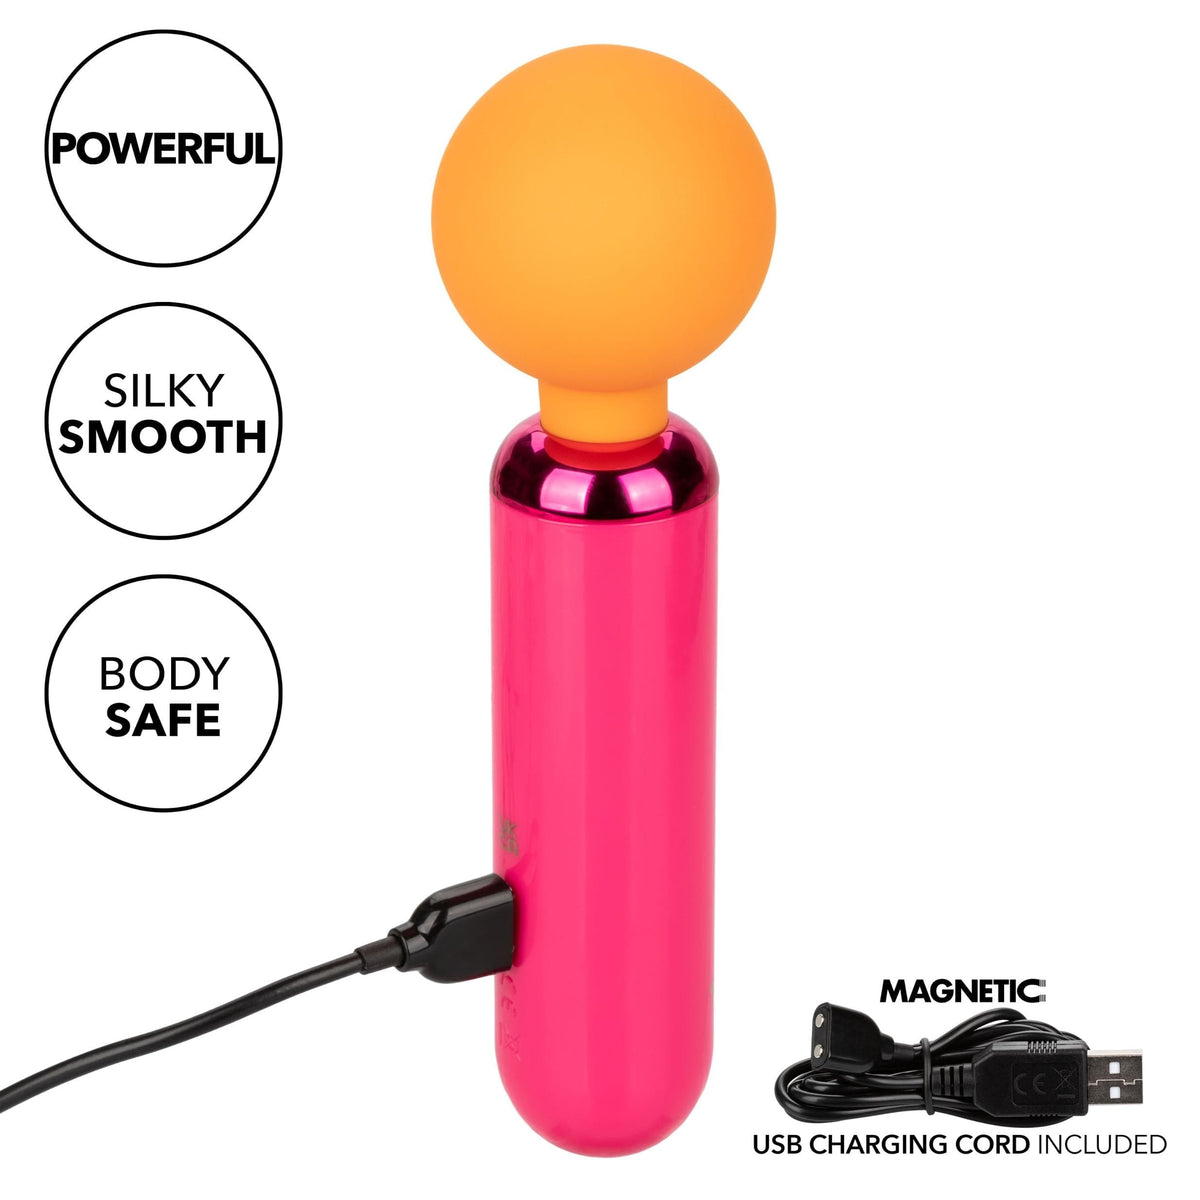 naughty bits home cumming queen vibrating wand orange pink